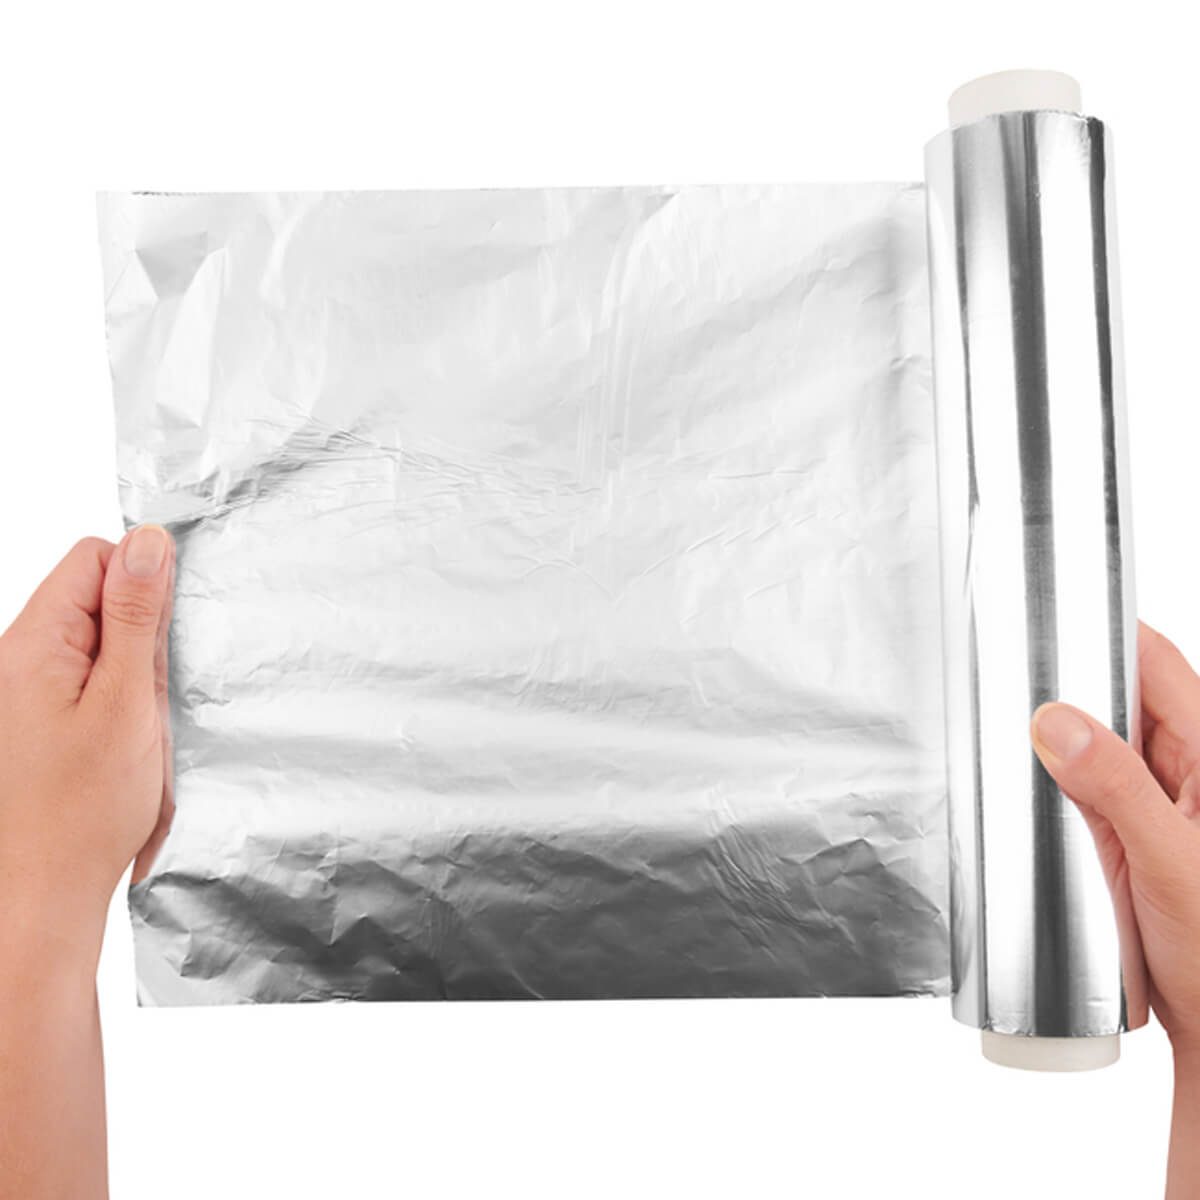 19 Aluminum Foil Uses for Laundry, Paint Projects, and More - Bob Vila